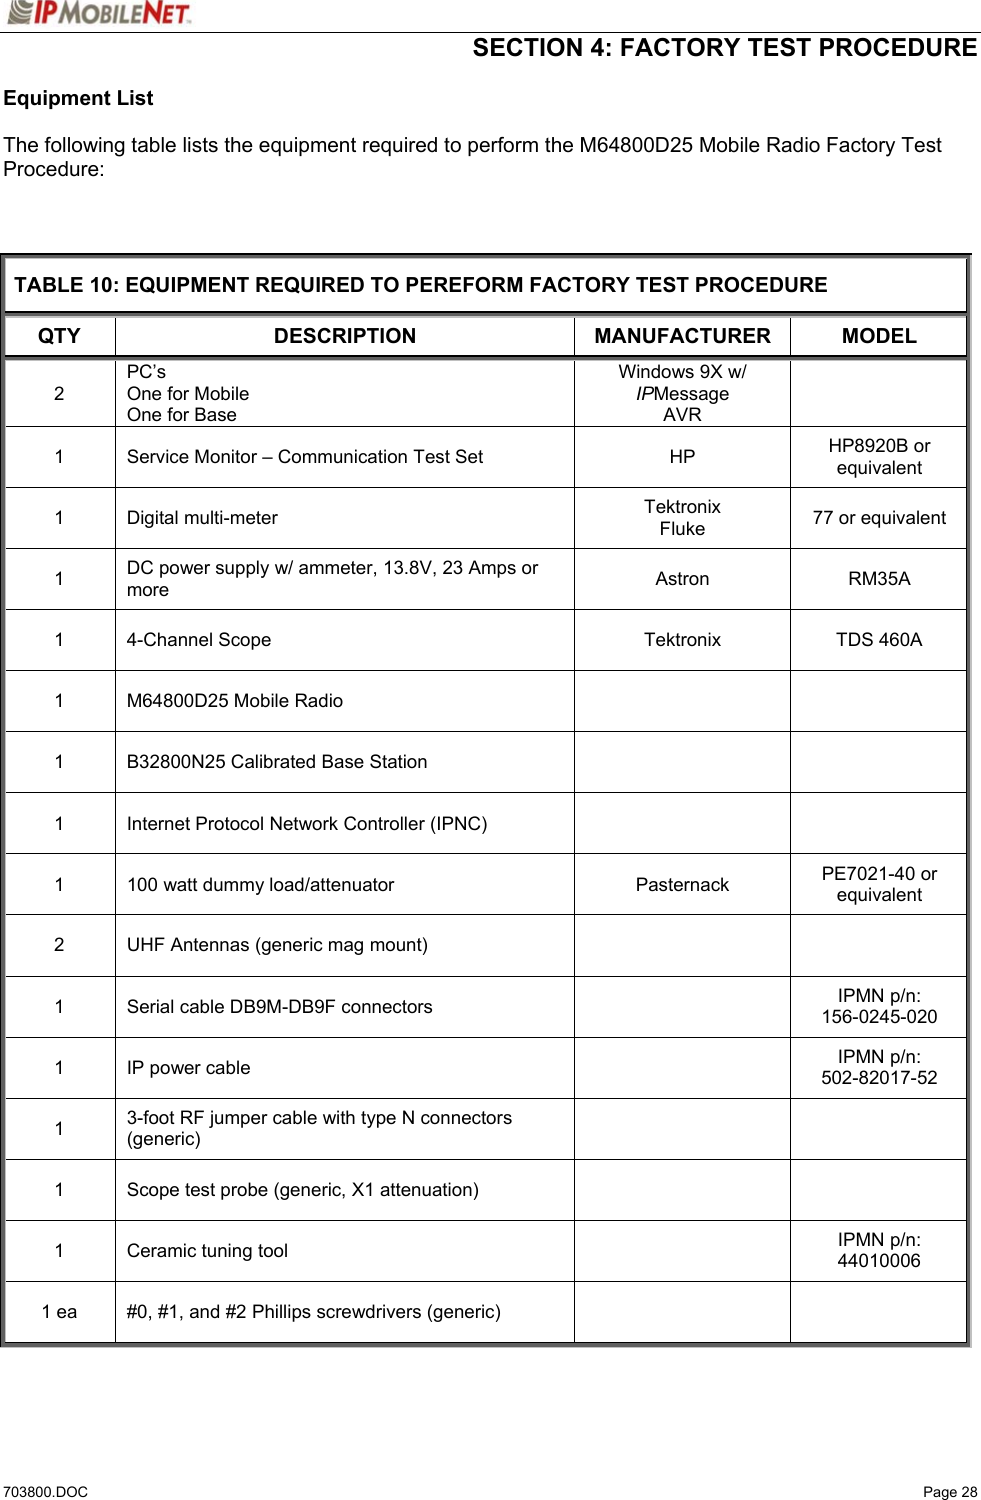  SECTION 4: FACTORY TEST PROCEDURE  703800.DOC   Page 28 Equipment List   The following table lists the equipment required to perform the M64800D25 Mobile Radio Factory Test Procedure:    TABLE 10: EQUIPMENT REQUIRED TO PEREFORM FACTORY TEST PROCEDURE QTY DESCRIPTION MANUFACTURER MODEL 2 PC’s One for Mobile One for Base Windows 9X w/  IPMessage AVR  1  Service Monitor – Communication Test Set  HP  HP8920B or equivalent 1 Digital multi-meter  Tektronix Fluke  77 or equivalent 1  DC power supply w/ ammeter, 13.8V, 23 Amps or more  Astron  RM35A   1  4-Channel Scope  Tektronix  TDS 460A 1  M64800D25 Mobile Radio     1  B32800N25 Calibrated Base Station     1  Internet Protocol Network Controller (IPNC)     1  100 watt dummy load/attenuator  Pasternack  PE7021-40 or equivalent 2  UHF Antennas (generic mag mount)     1  Serial cable DB9M-DB9F connectors    IPMN p/n:  156-0245-020 1  IP power cable    IPMN p/n: 502-82017-52 1  3-foot RF jumper cable with type N connectors (generic)    1  Scope test probe (generic, X1 attenuation)     1  Ceramic tuning tool    IPMN p/n: 44010006 1 ea  #0, #1, and #2 Phillips screwdrivers (generic)        